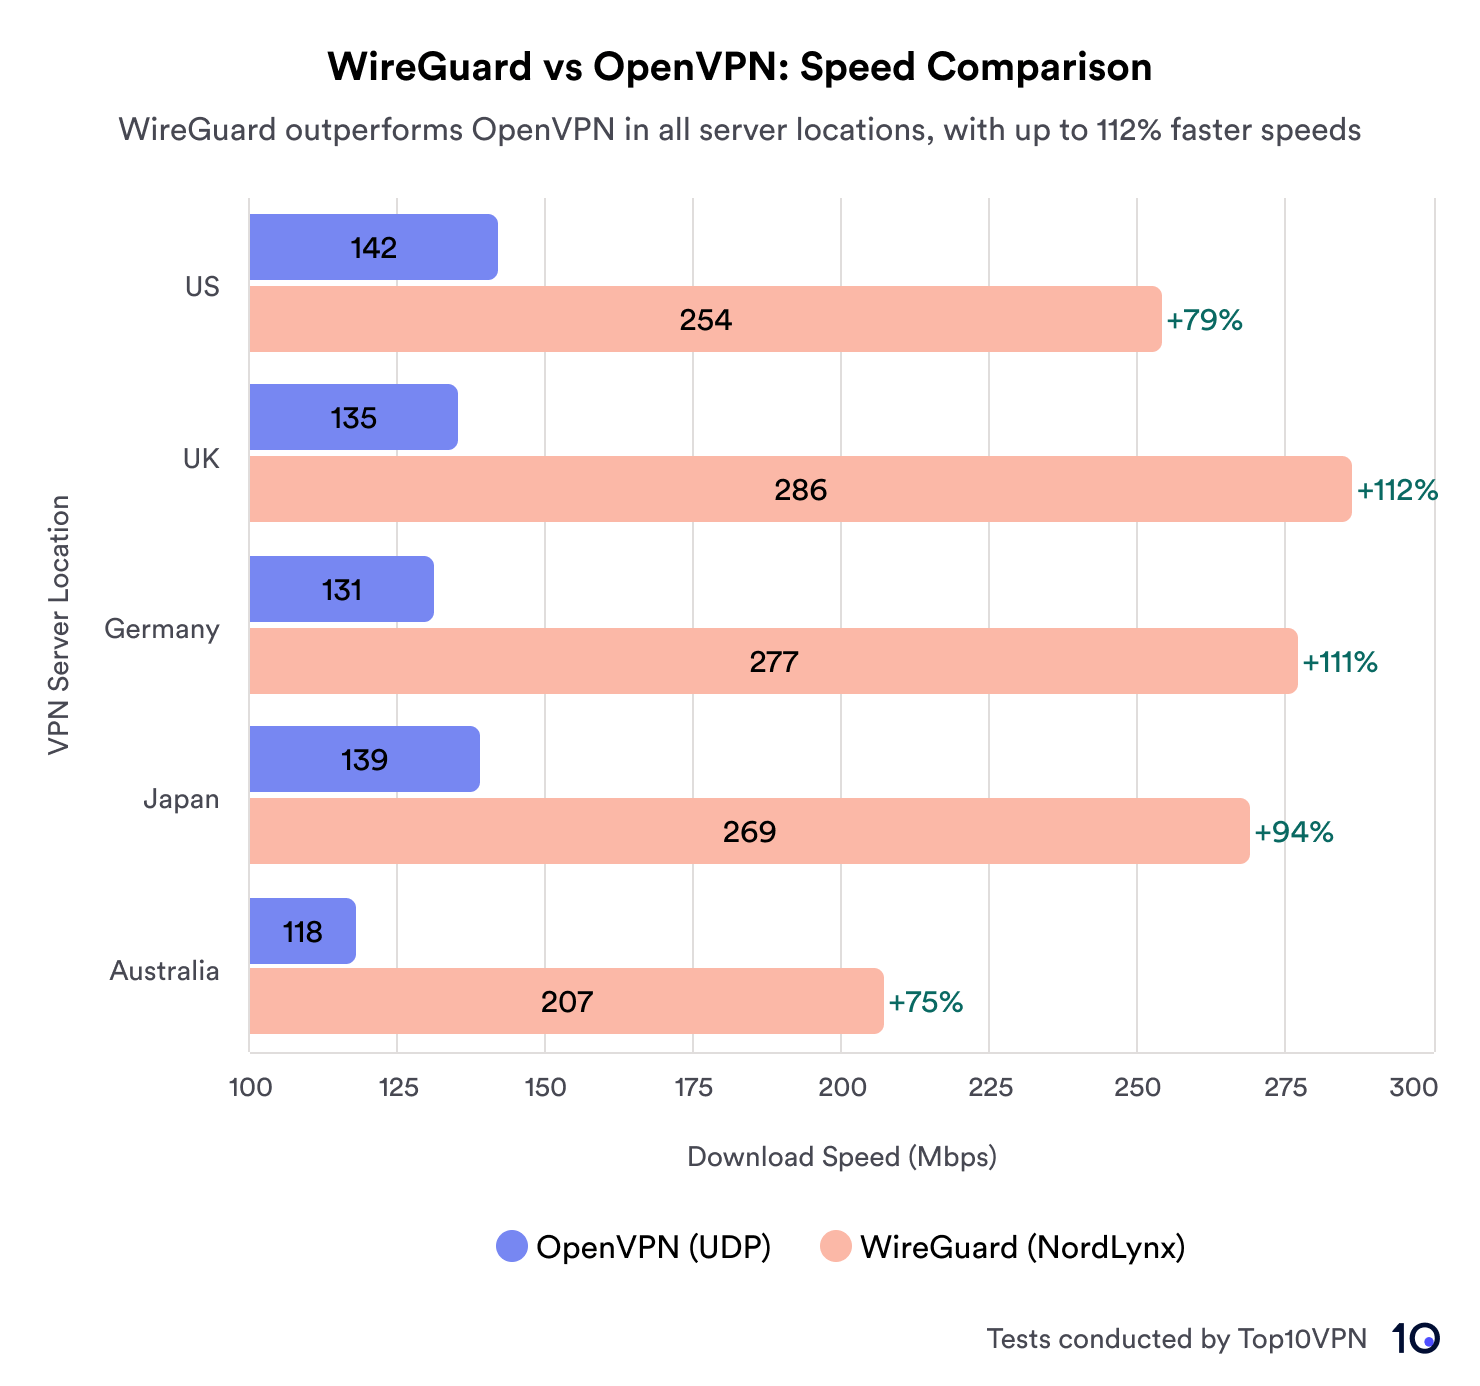 Bar chart comparing WireGuard and OpenVPN's download speeds across a range of server locations